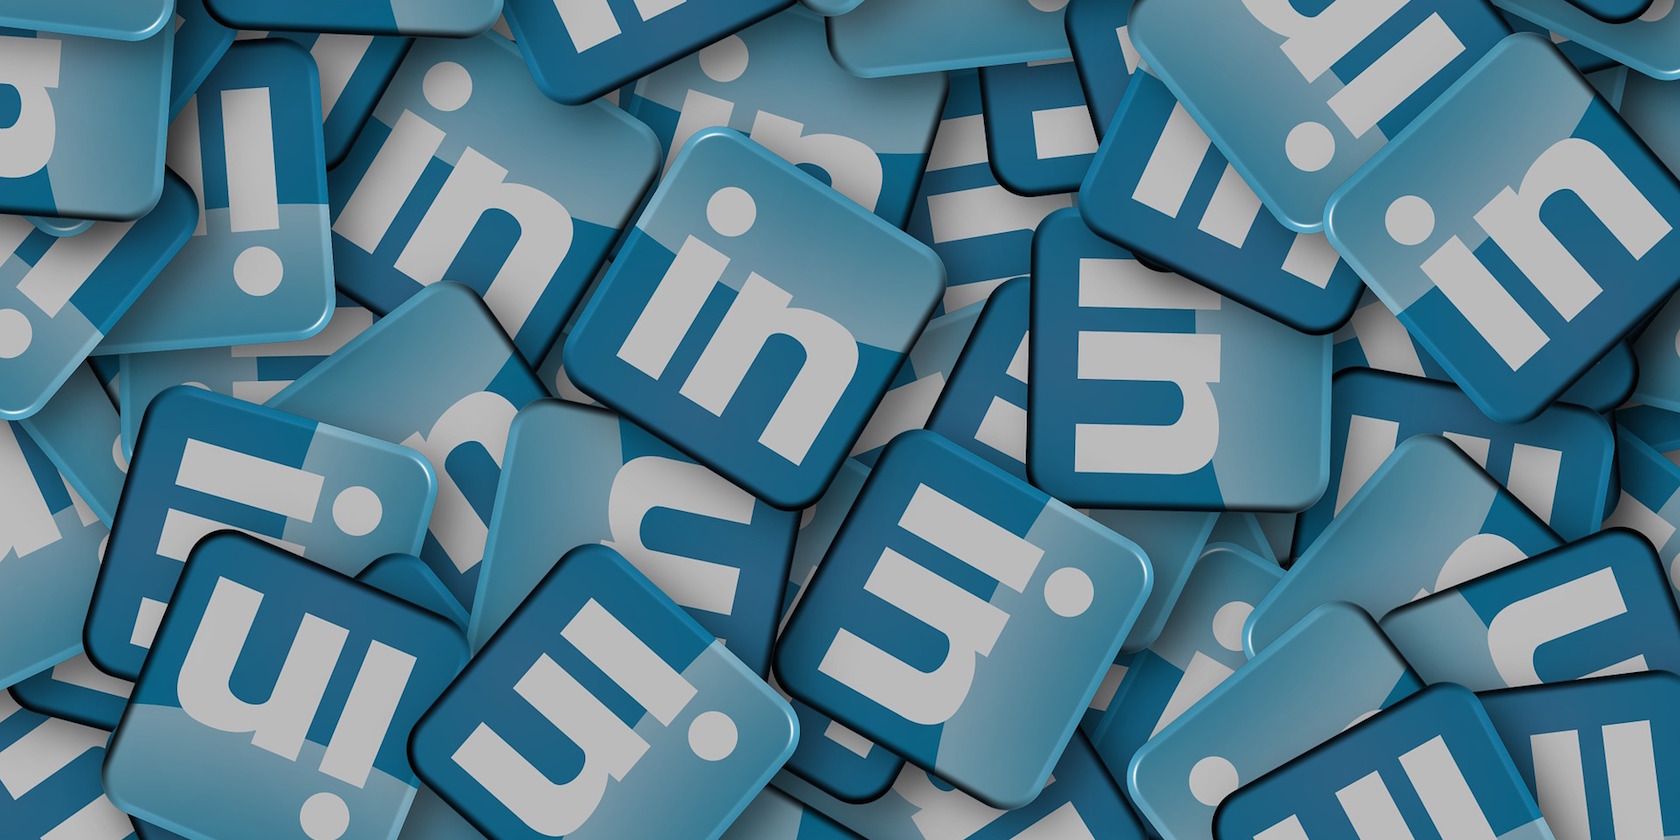 How to Deactivate or Delete Your LinkedIn Account